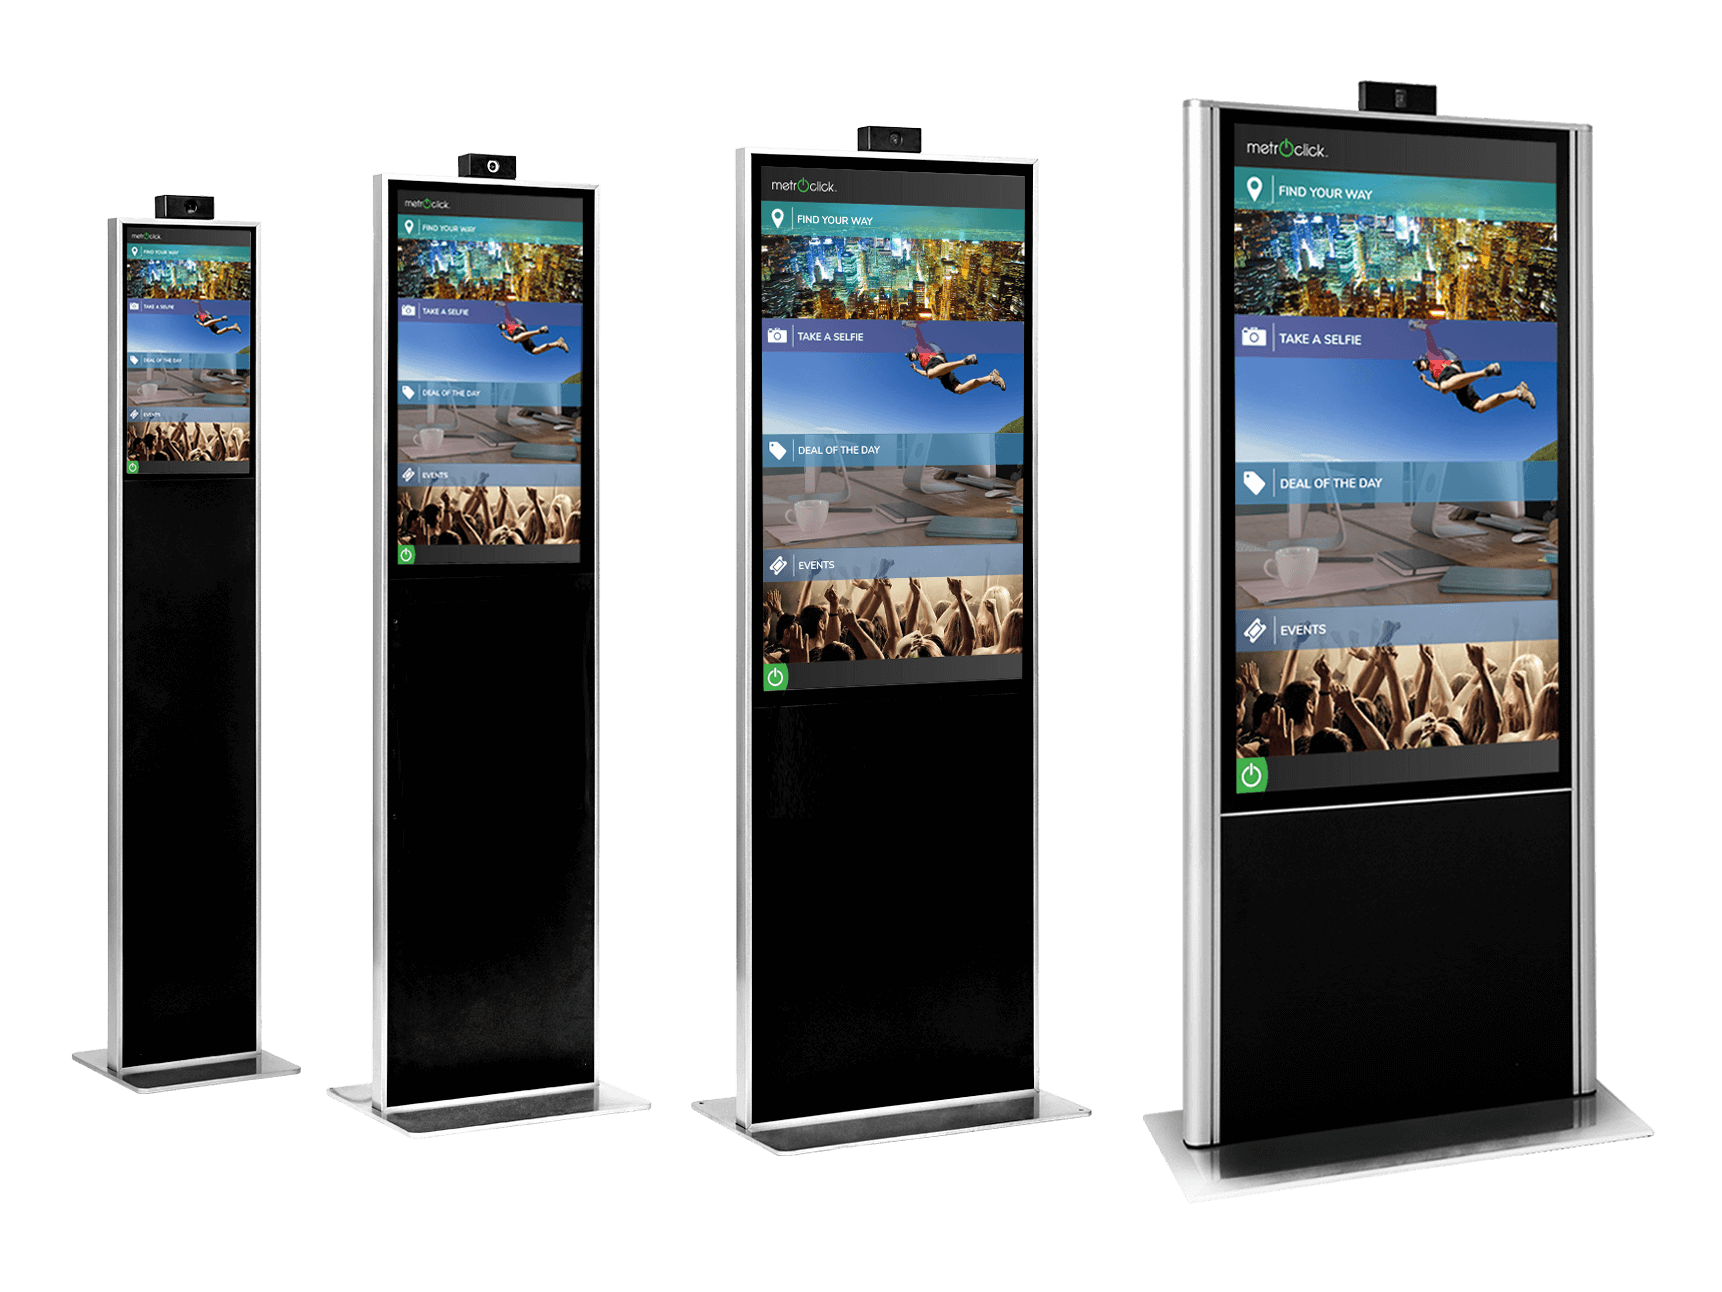 How Your Business Might Use a MetroClick Kiosk With a Double Screen